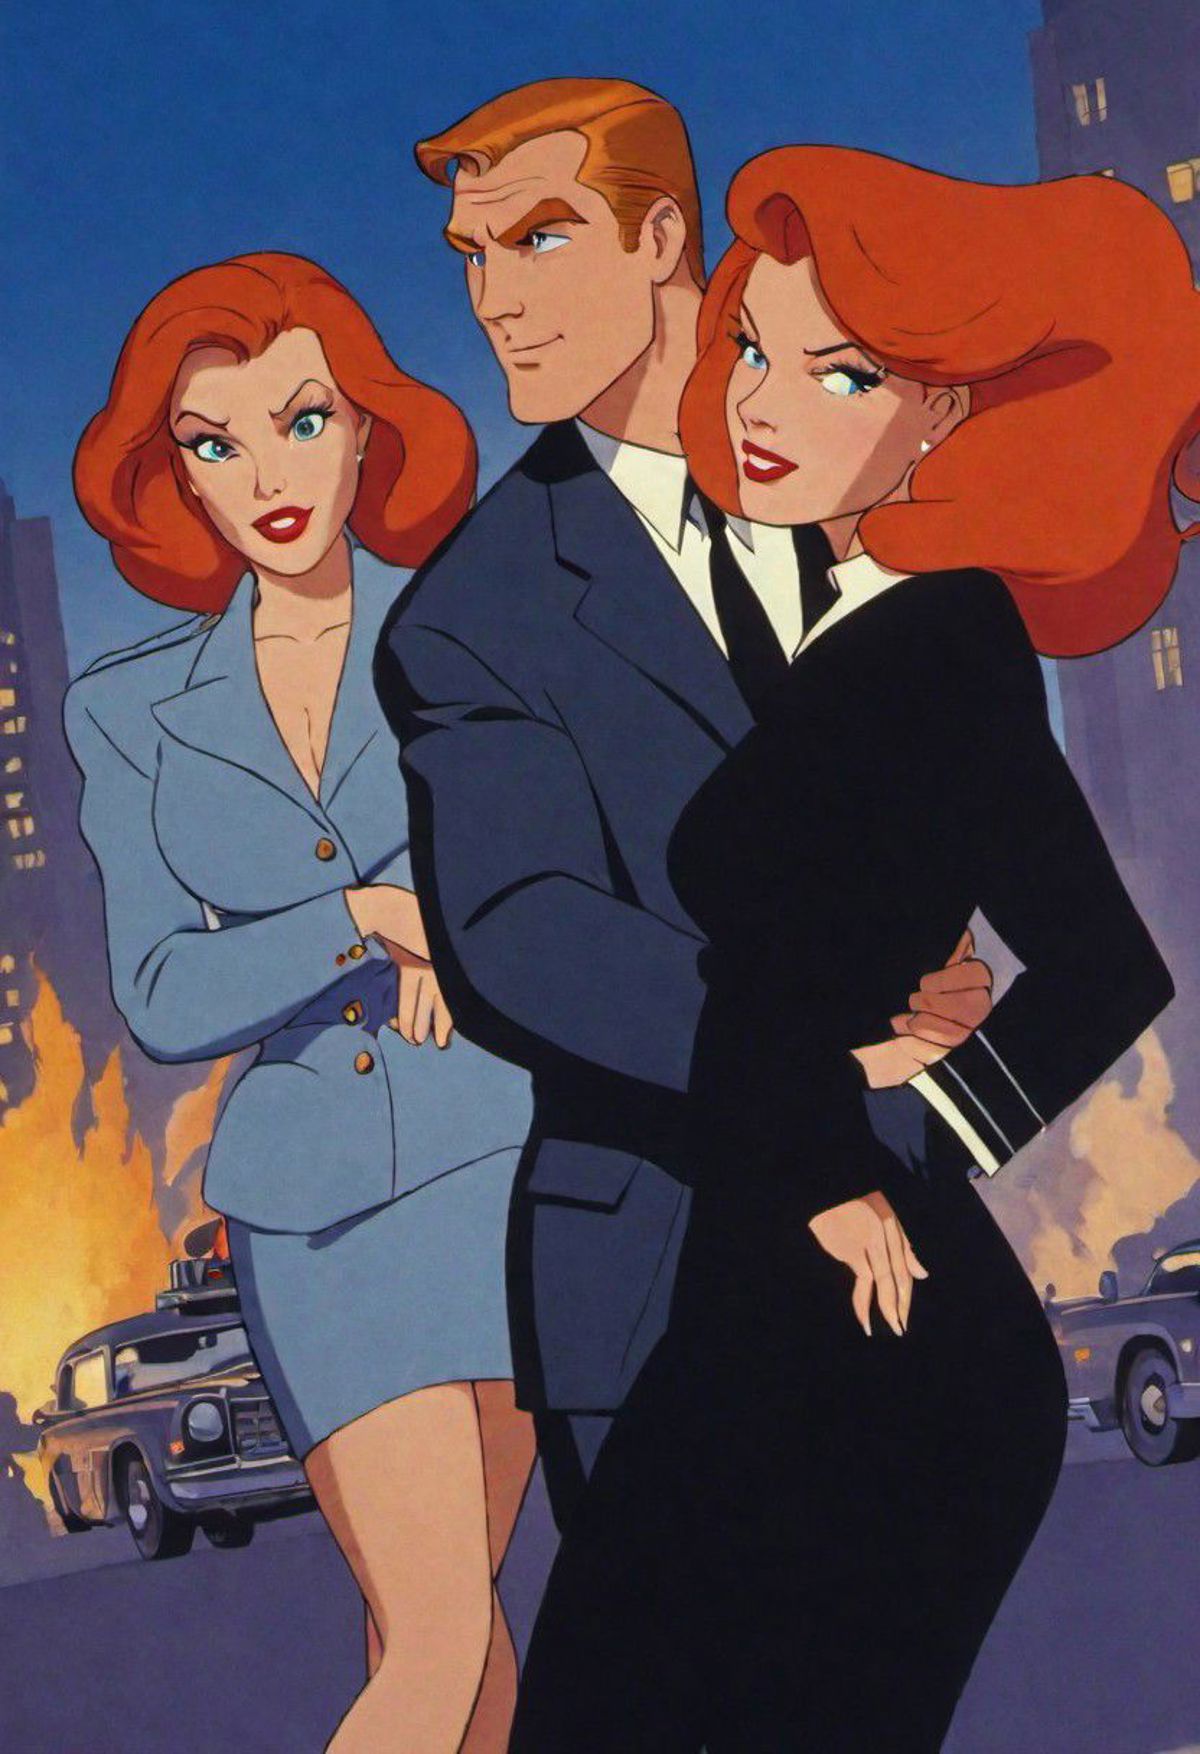 A comic book illustration of a man and two women in a city setting.